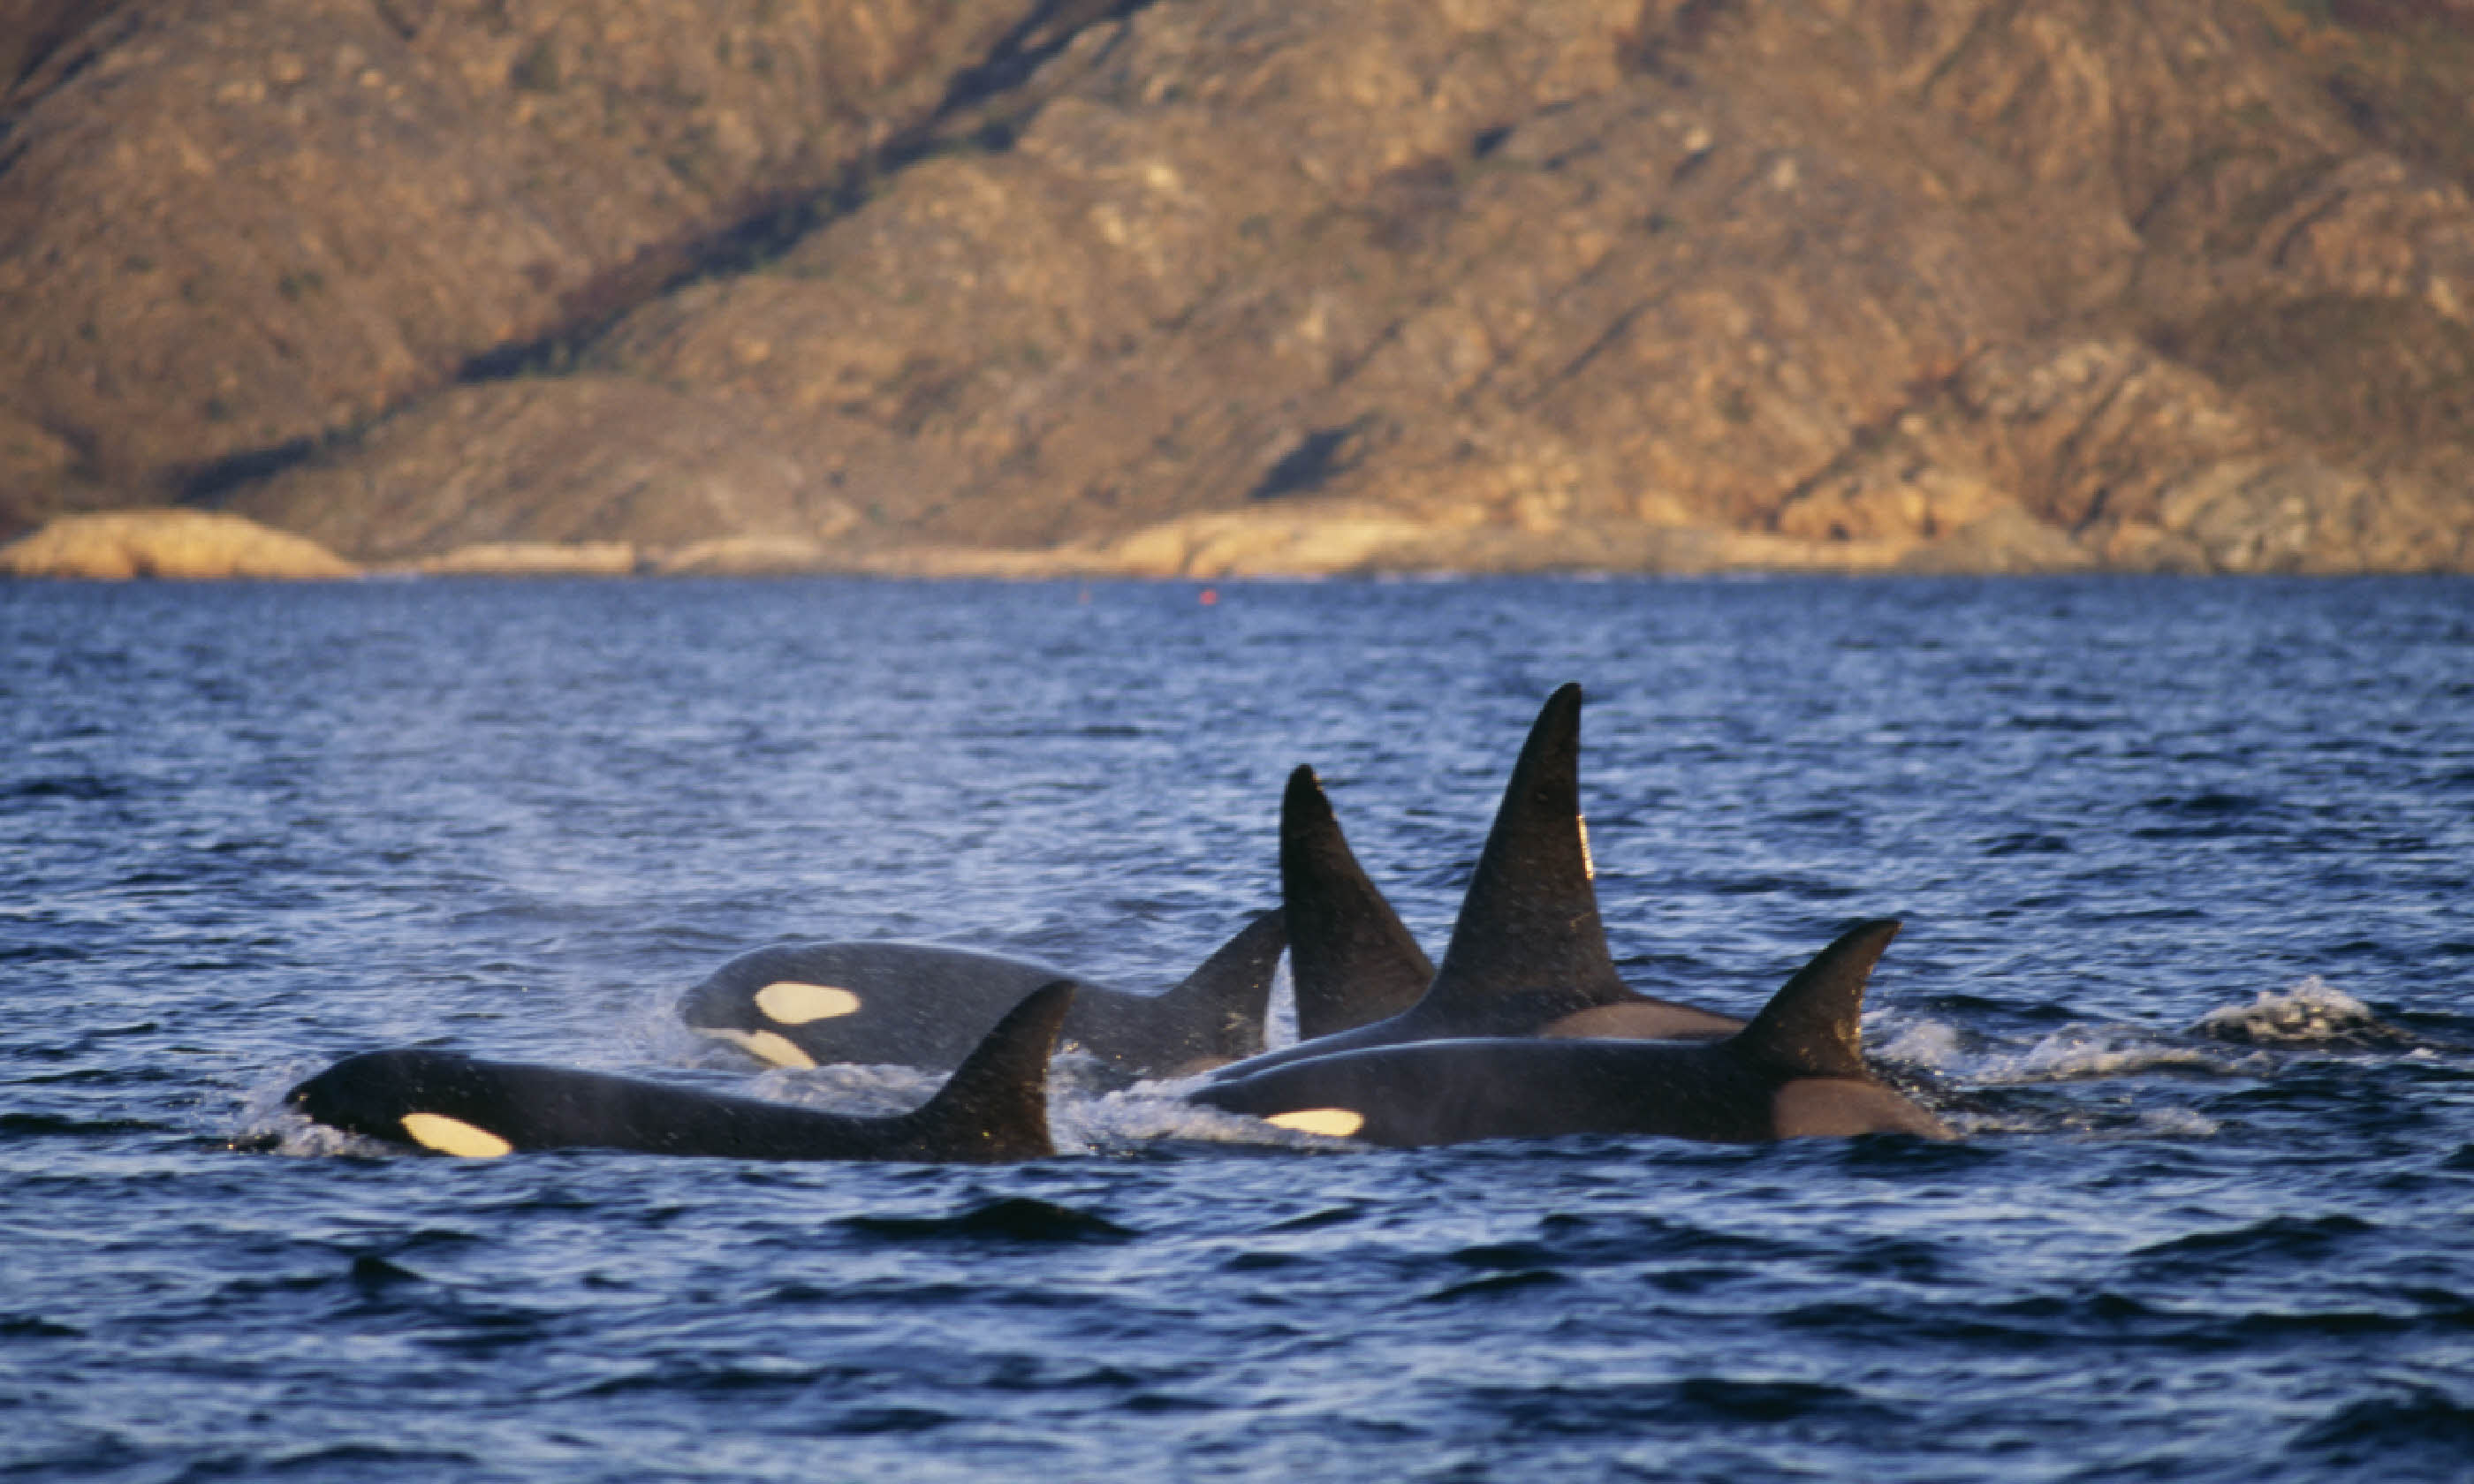 Group of killer whales, Norway (Shutterstock)